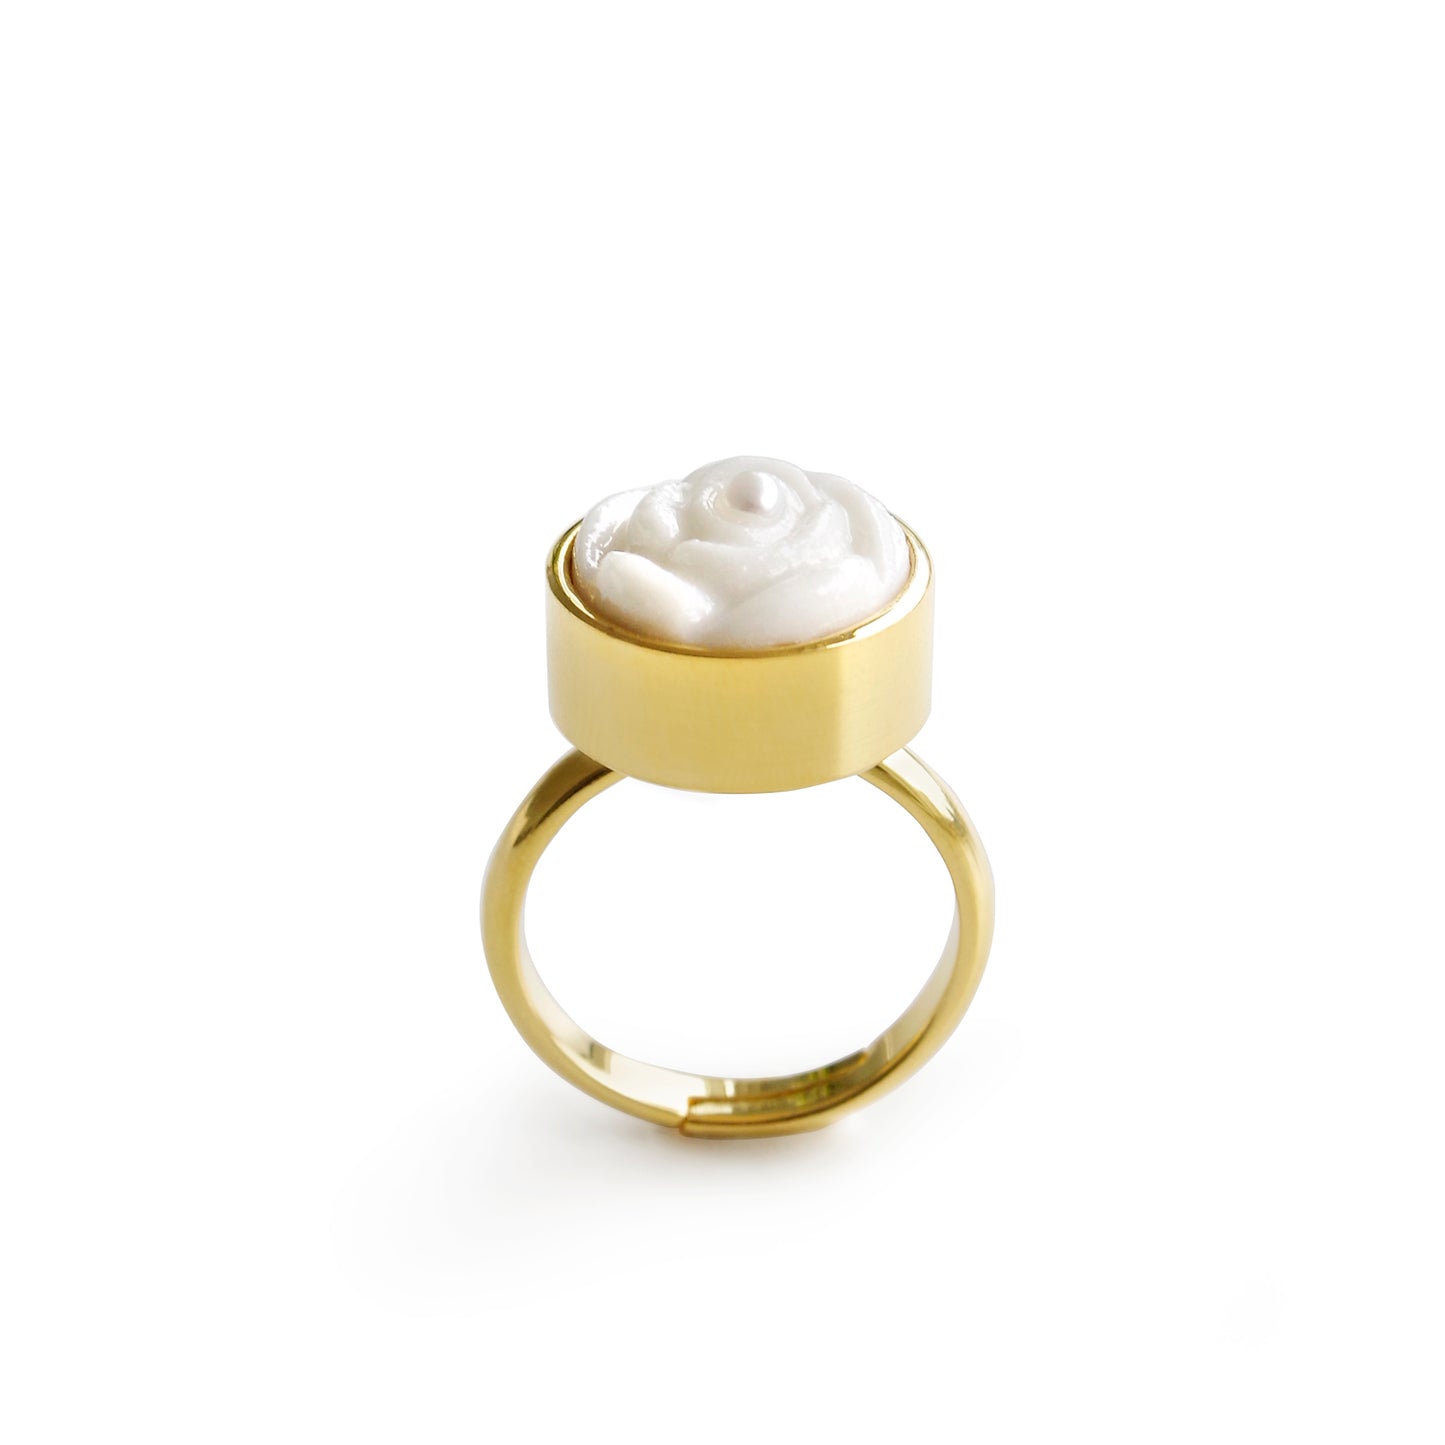 Porcelain Rose With Pearl Adjustable Ring